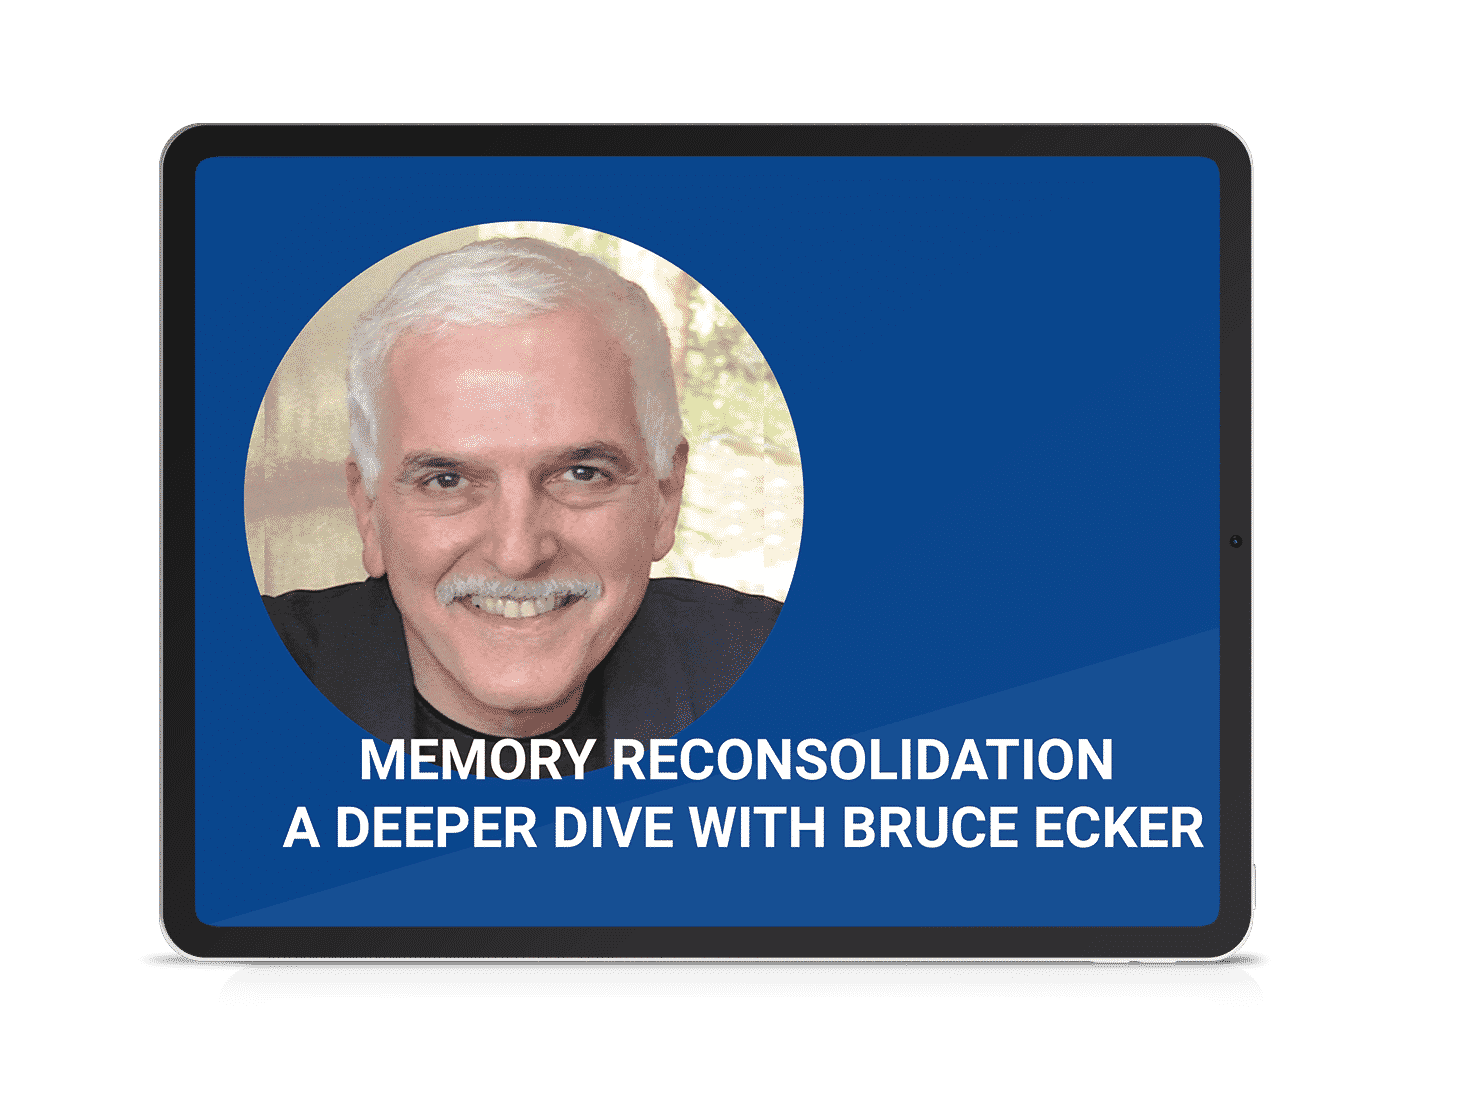 2.Memory Reconsolidation a Deeper Dive Conversation with Bruce Ecker3